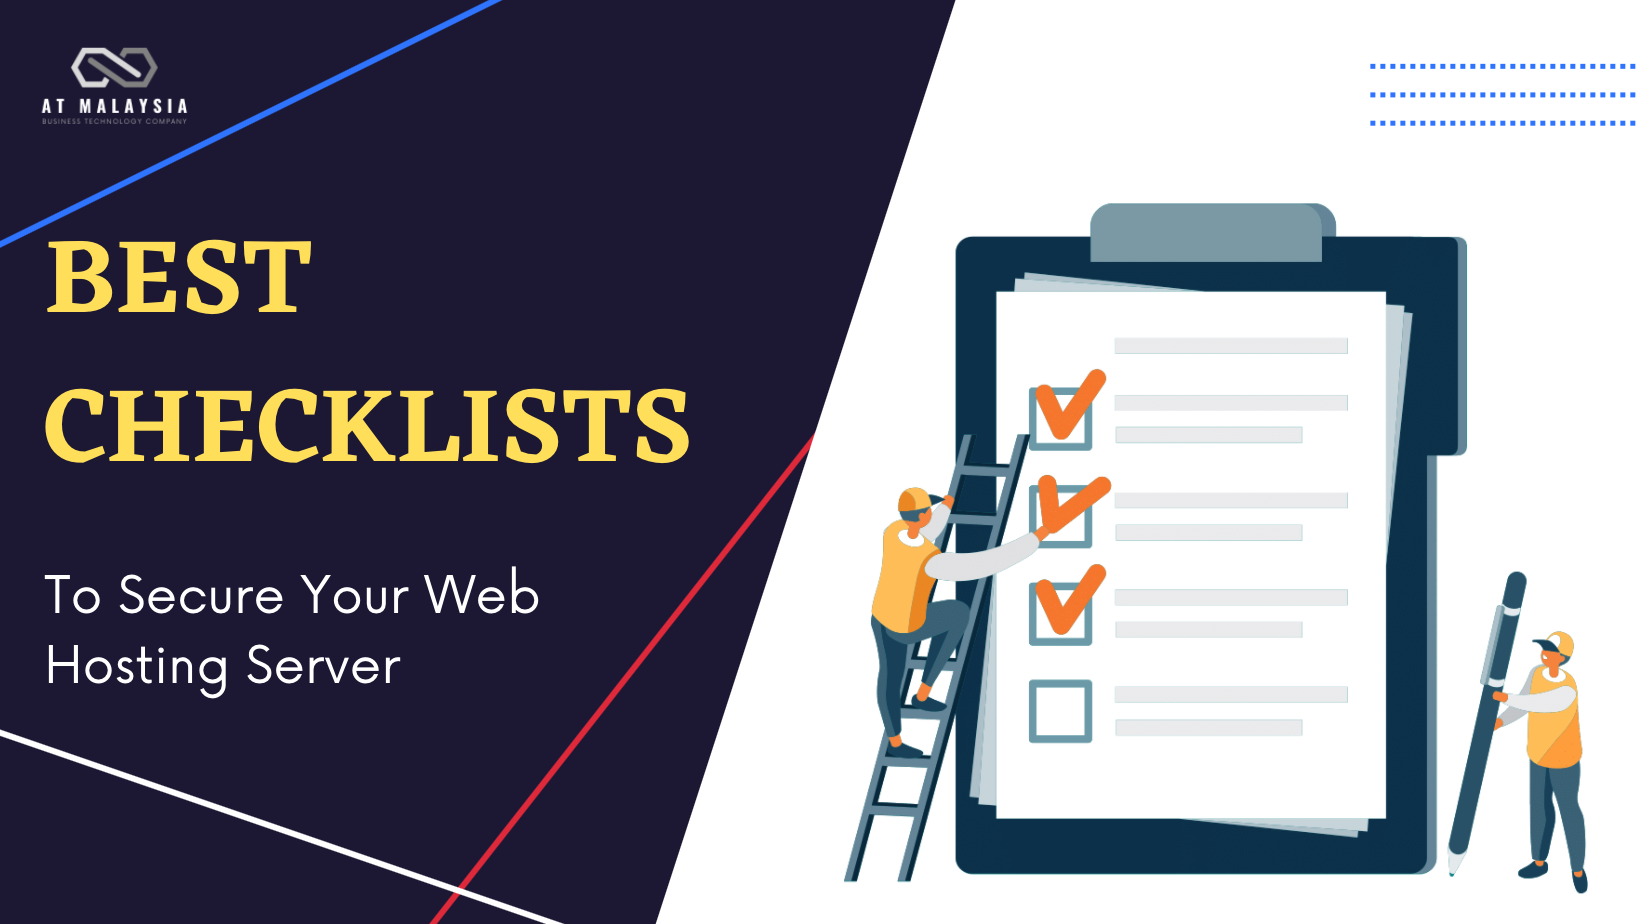 HOW TO SECURE WEBSITE?  |WEB HOSTING SECURITY CHECKLIST 2022 